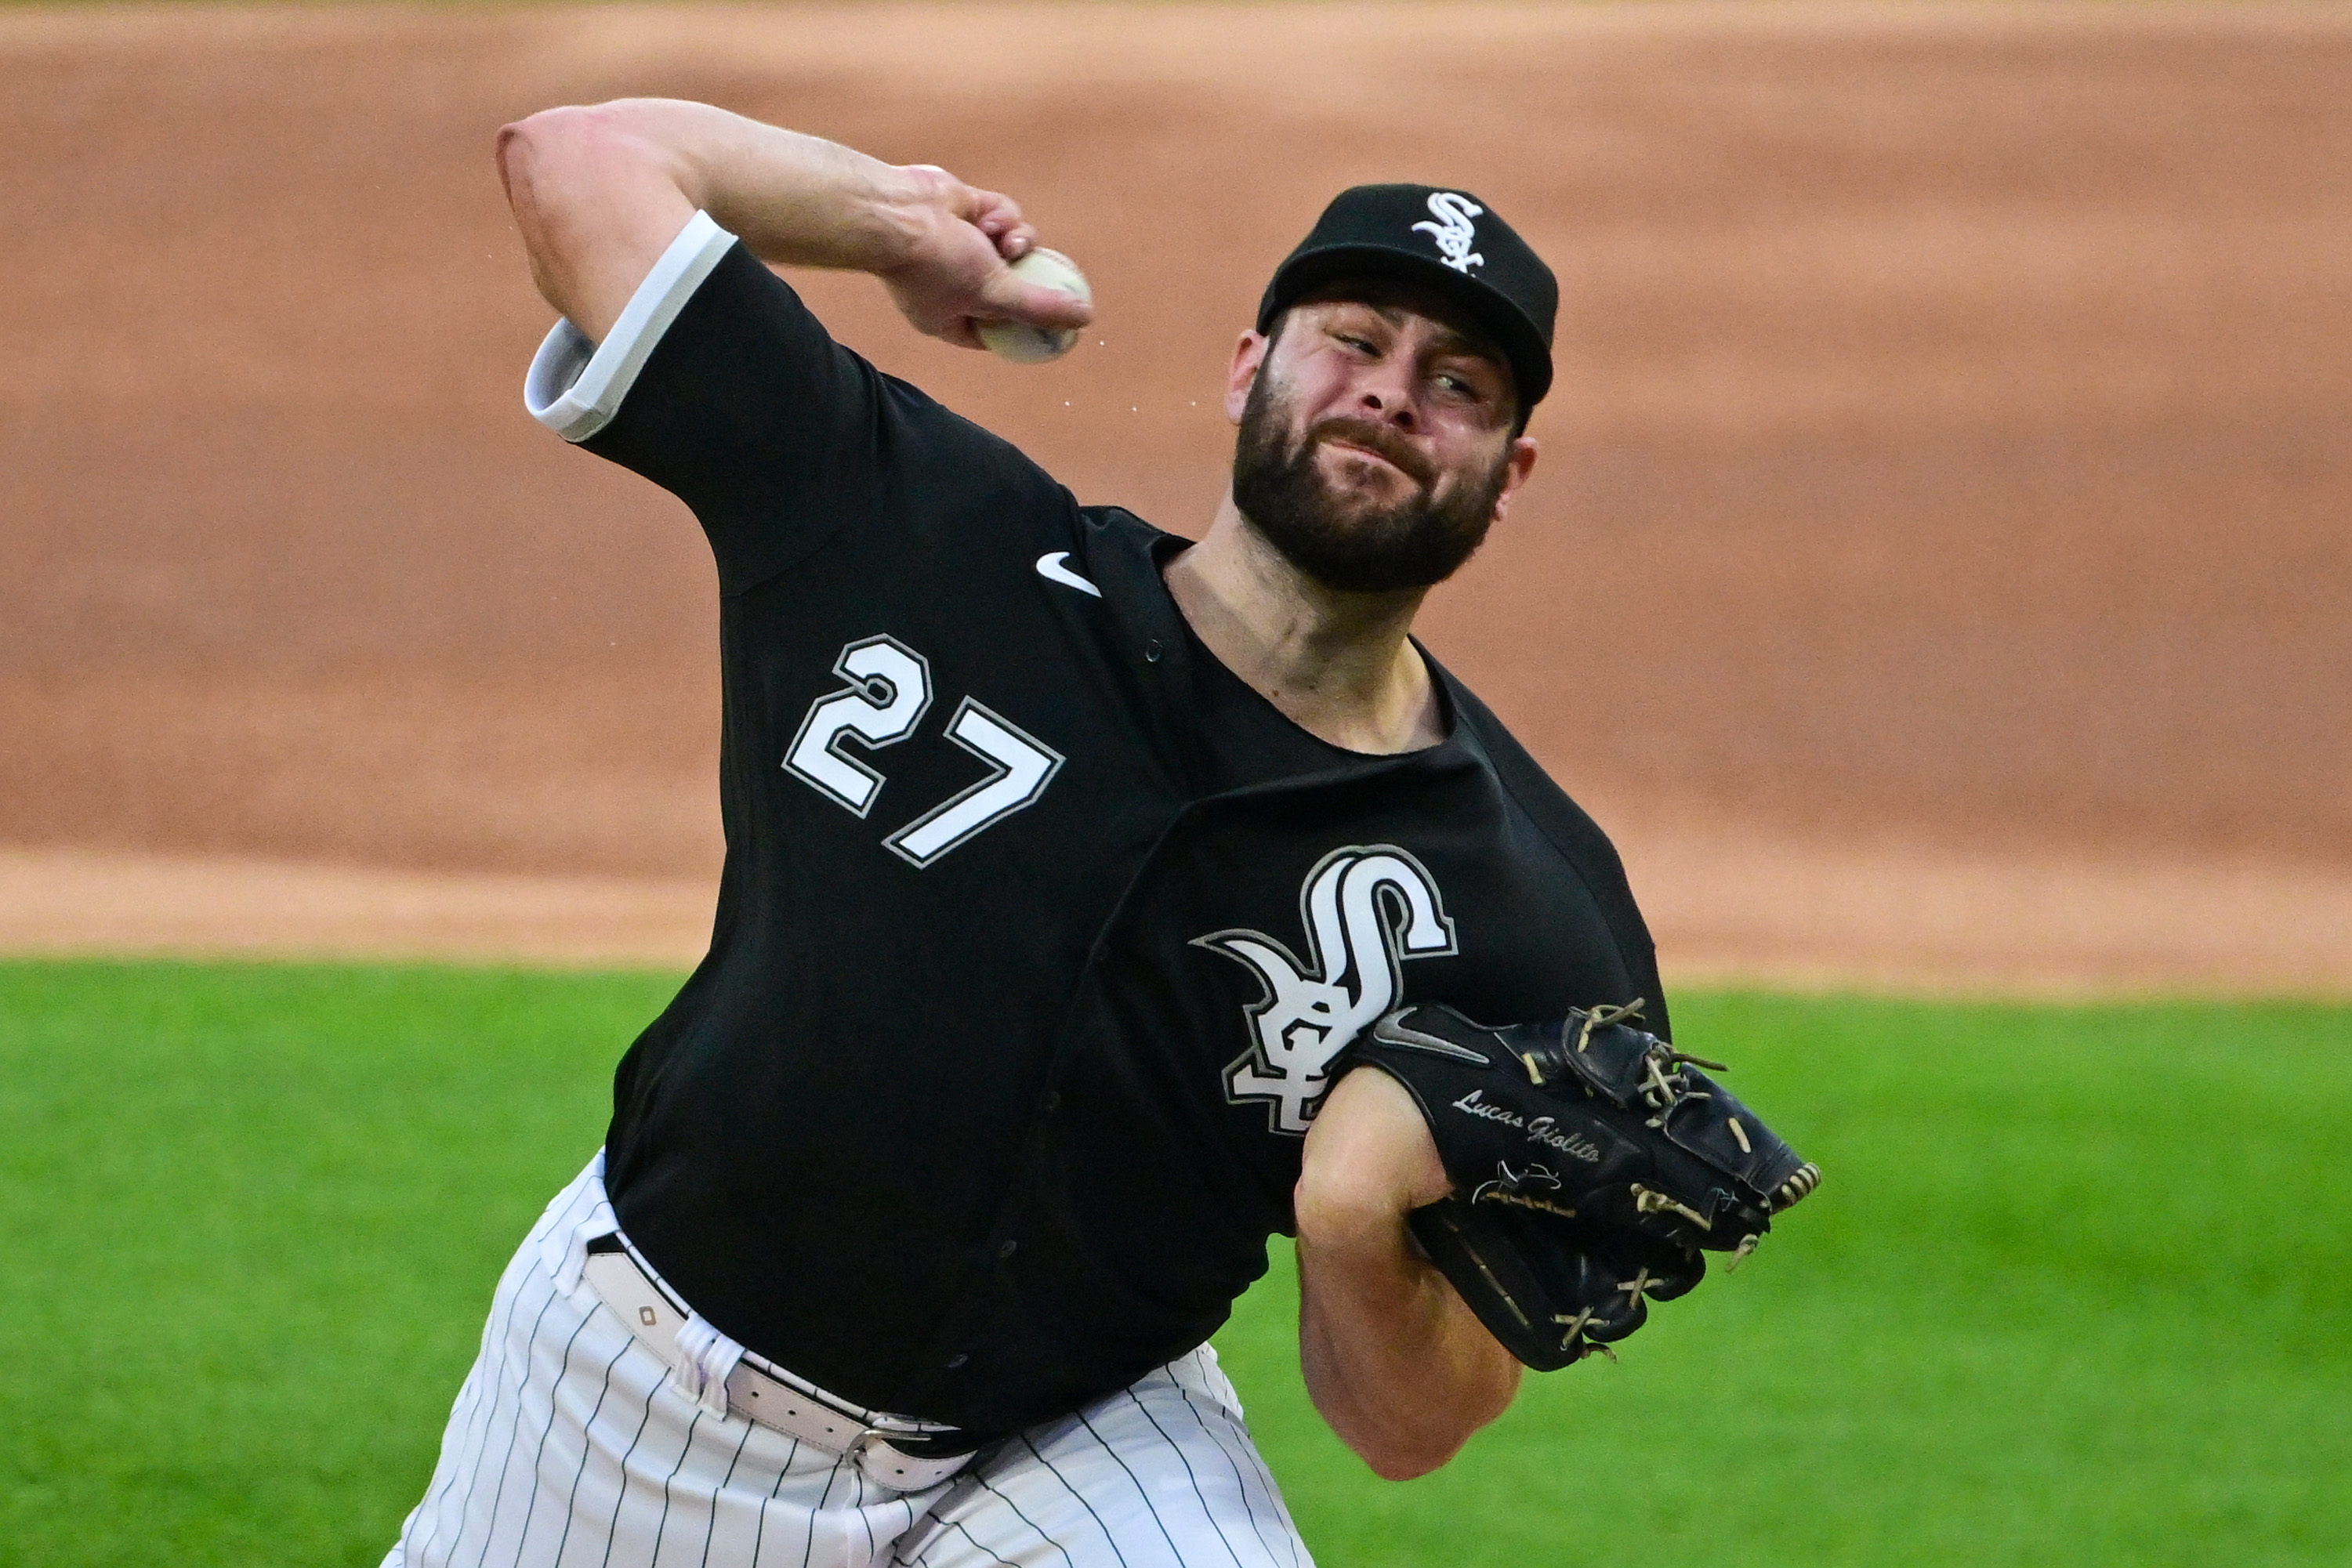 Starting pitcher Lucas Giolito #27 of the Chicago White Sox delivers the baseball in the first inning against the Cleveland Guardians at Guaranteed Rate Field on May 10, 2022 in Chicago, Illinois.